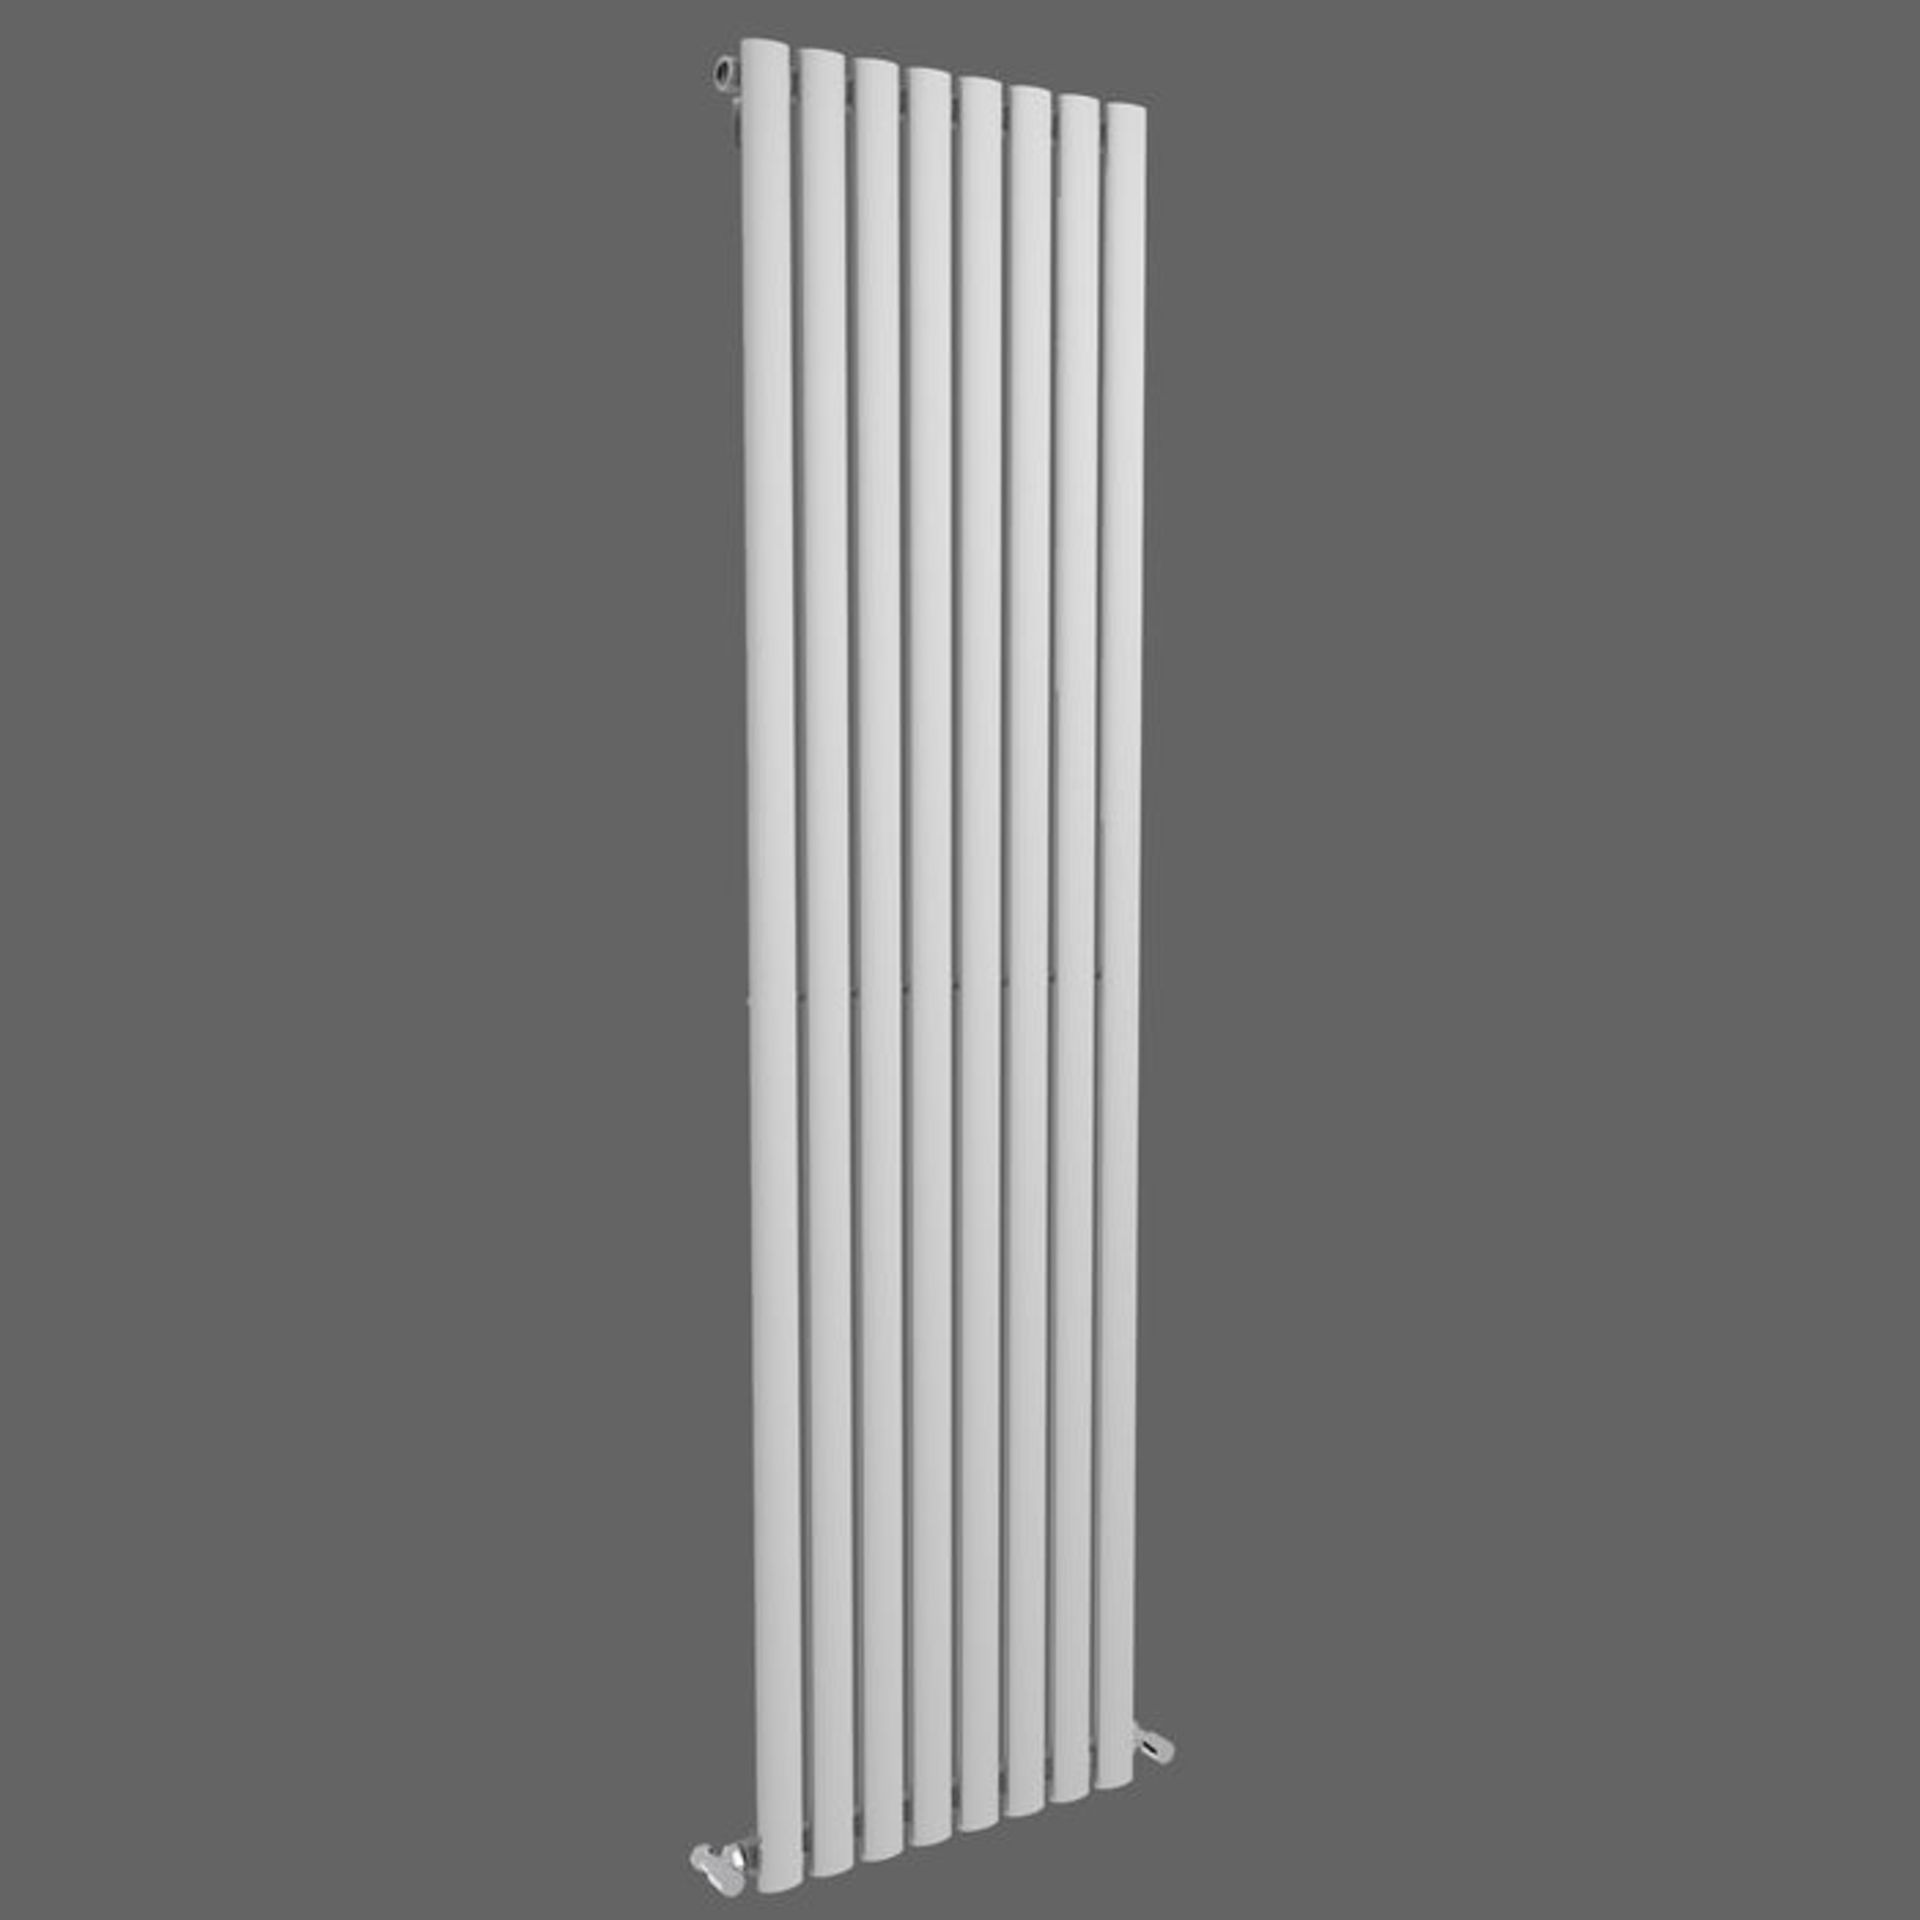 (L142) 1800x480mm Gloss White Single Oval Tube Vertical Radiator. RRP £223.99. Low carbon steel, - Image 3 of 3